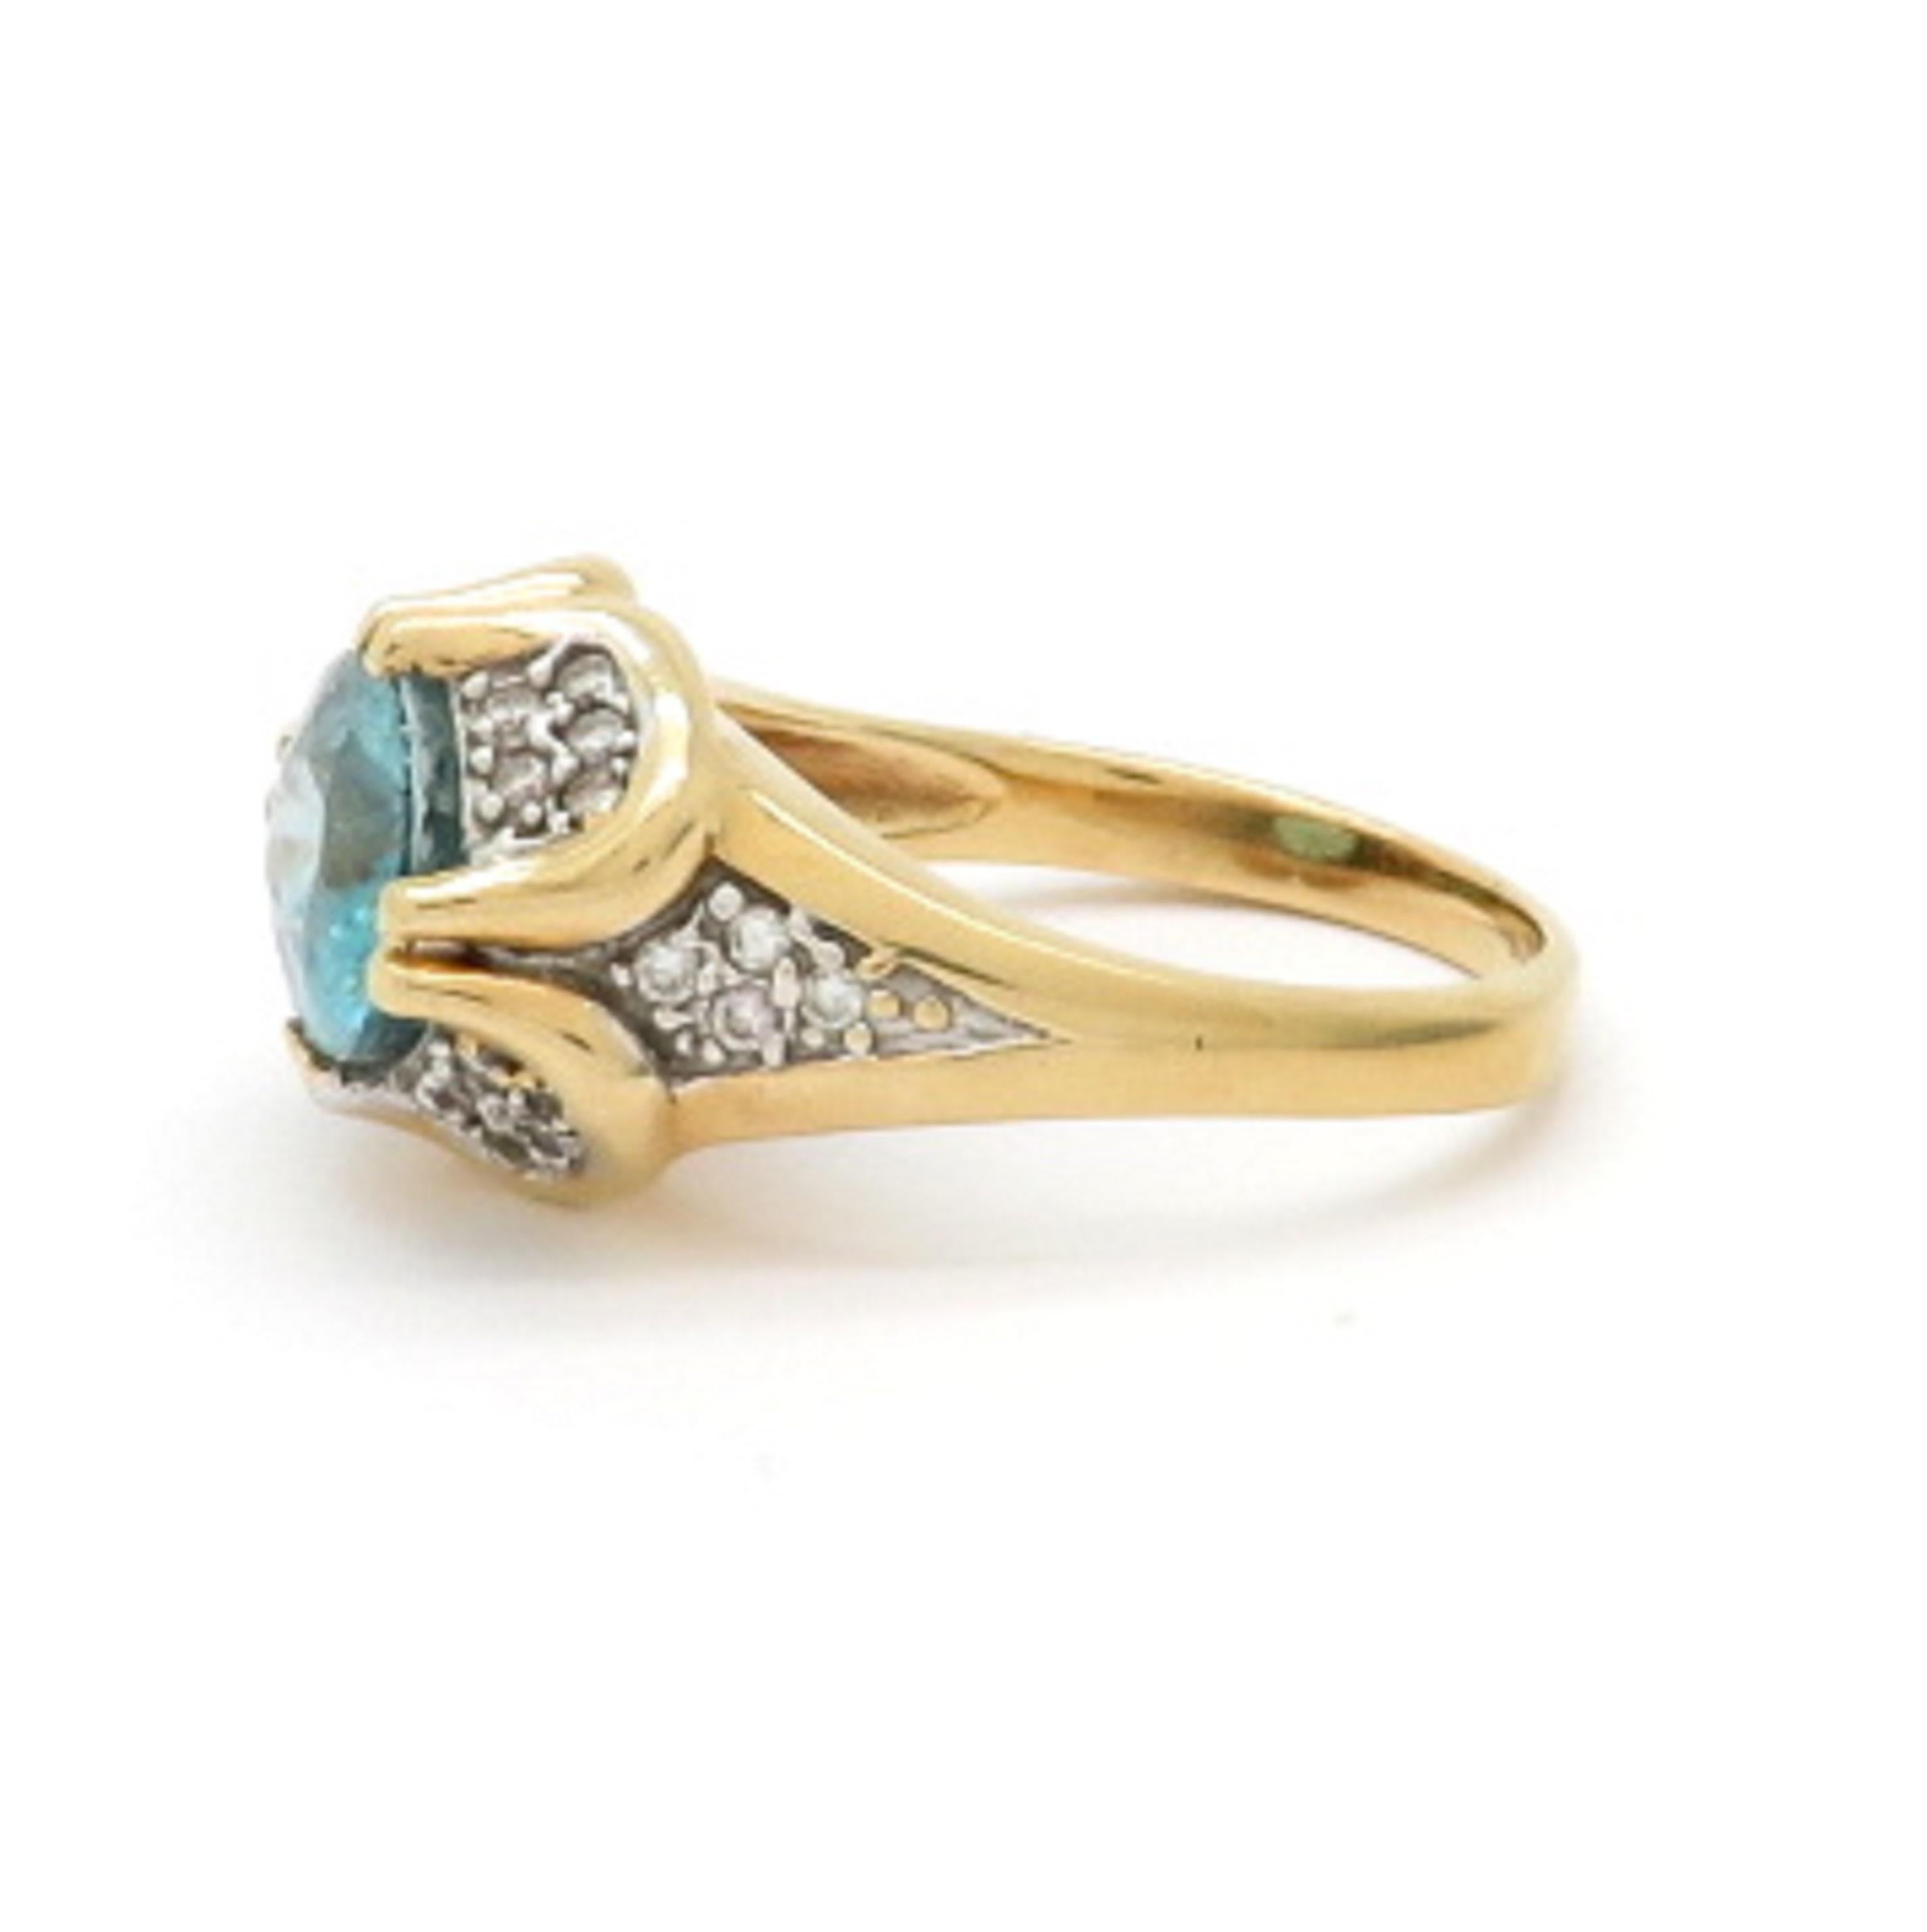 Estate 14K yellow gold 5.00 carat blue zircon and diamond ring. Showcasing one oval blue zircon fine quality gemstone weighing approximately 5.00 carats. Accented with 28 pave set round brilliant cut diamonds weighing a combined total of 0.30